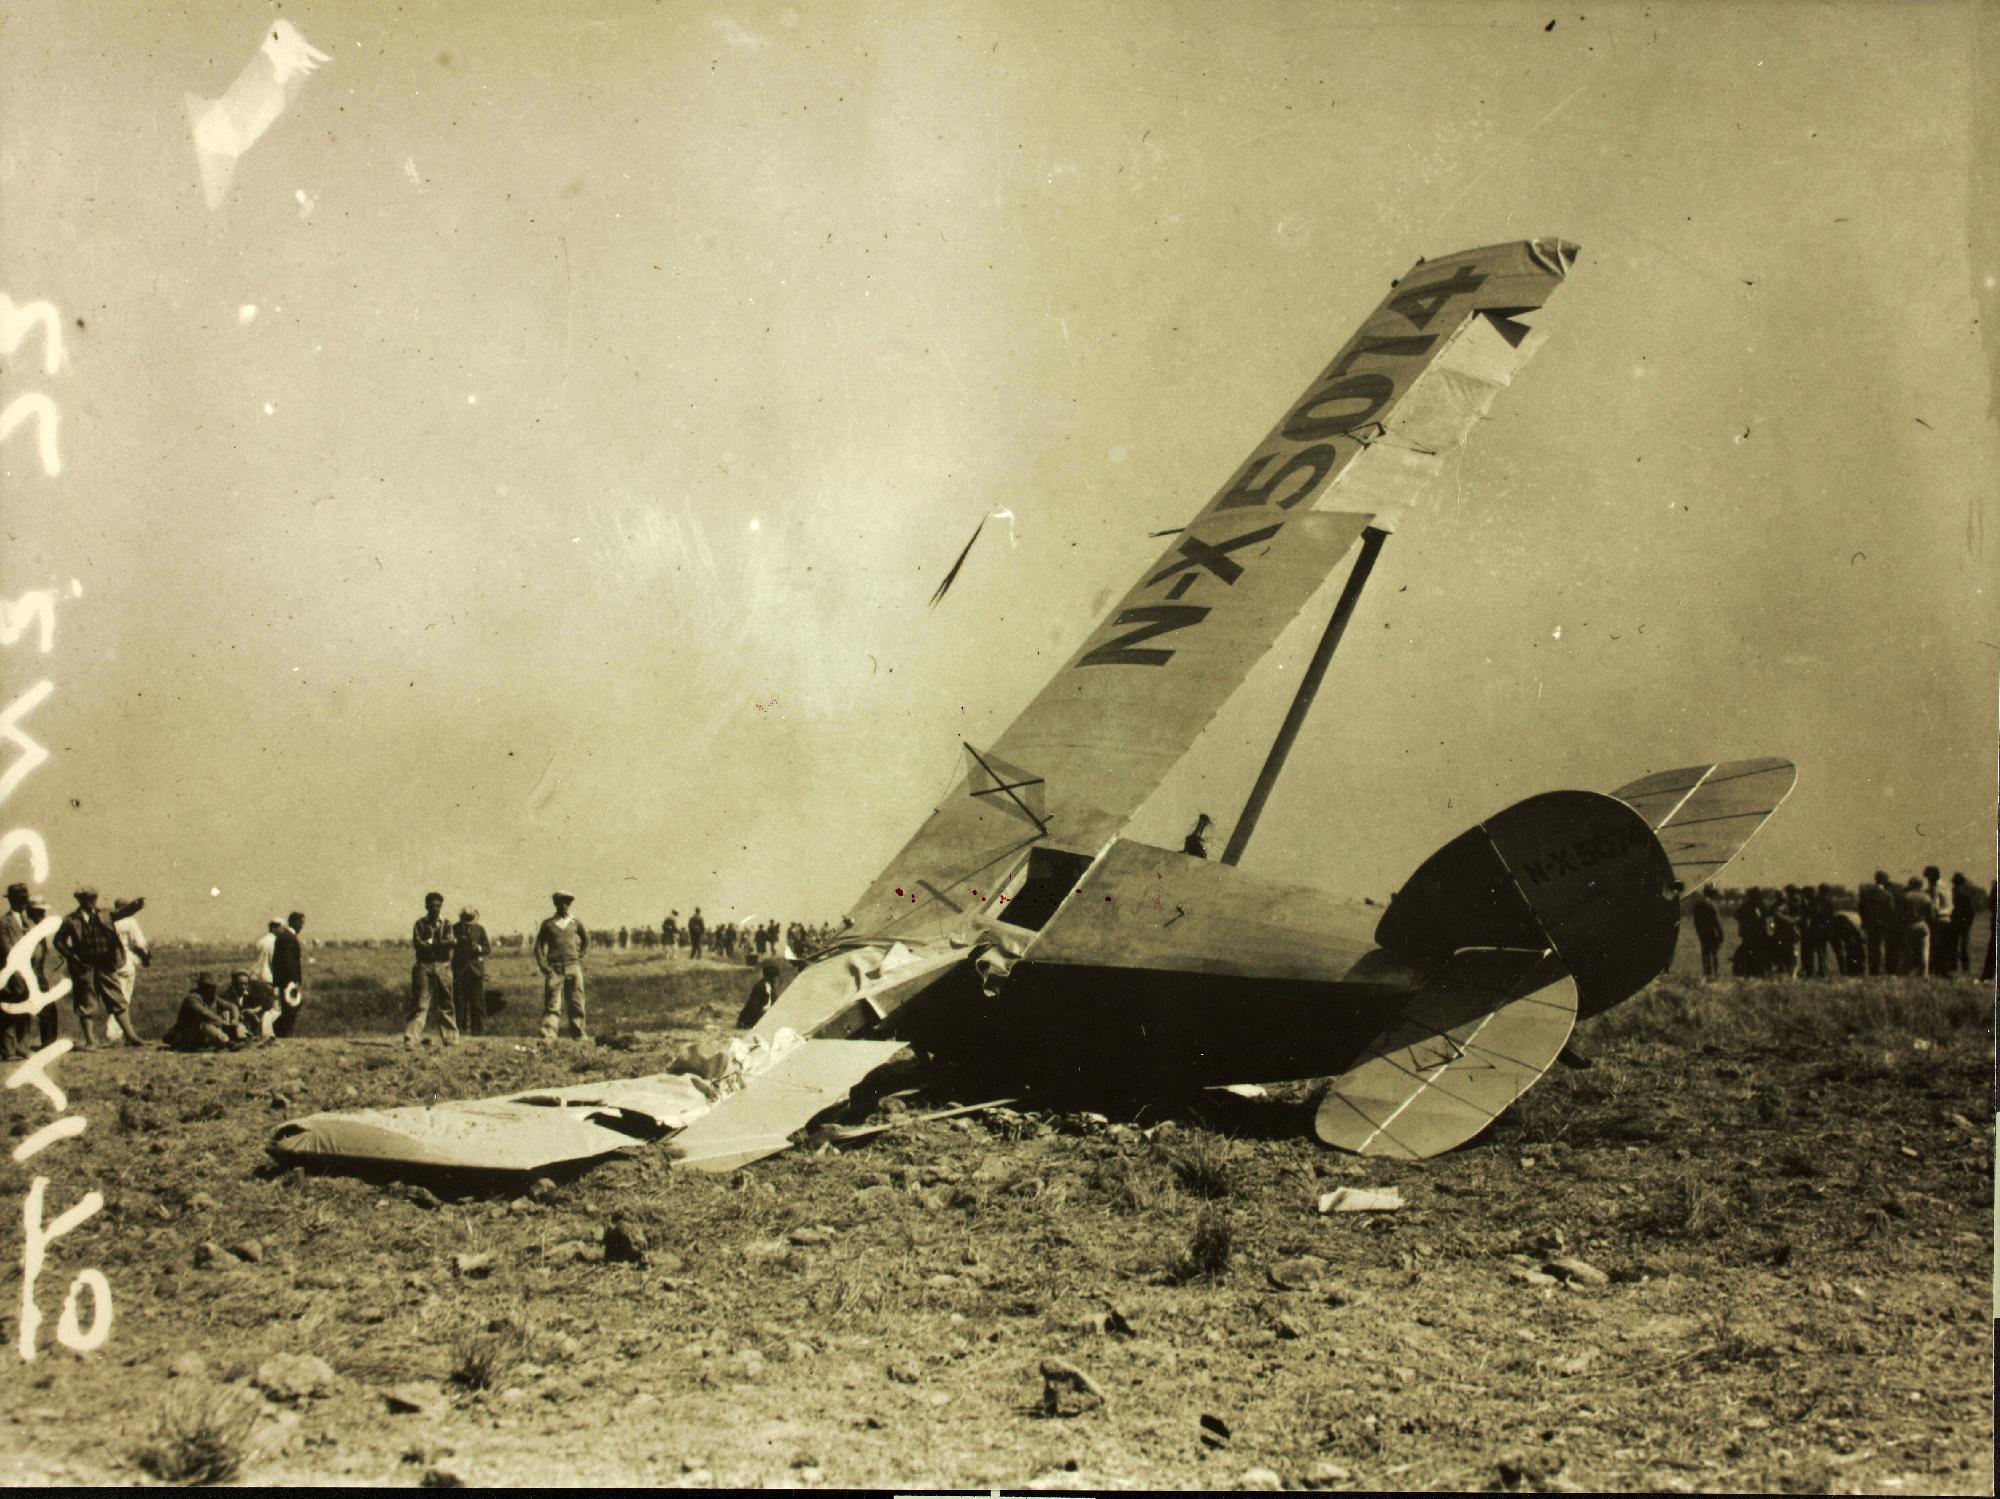 The Goddard Special, NX5074, El Encanto, which had been favored to win the race, crashed on takeoff. (San Diego Air and Space Museum Archives)